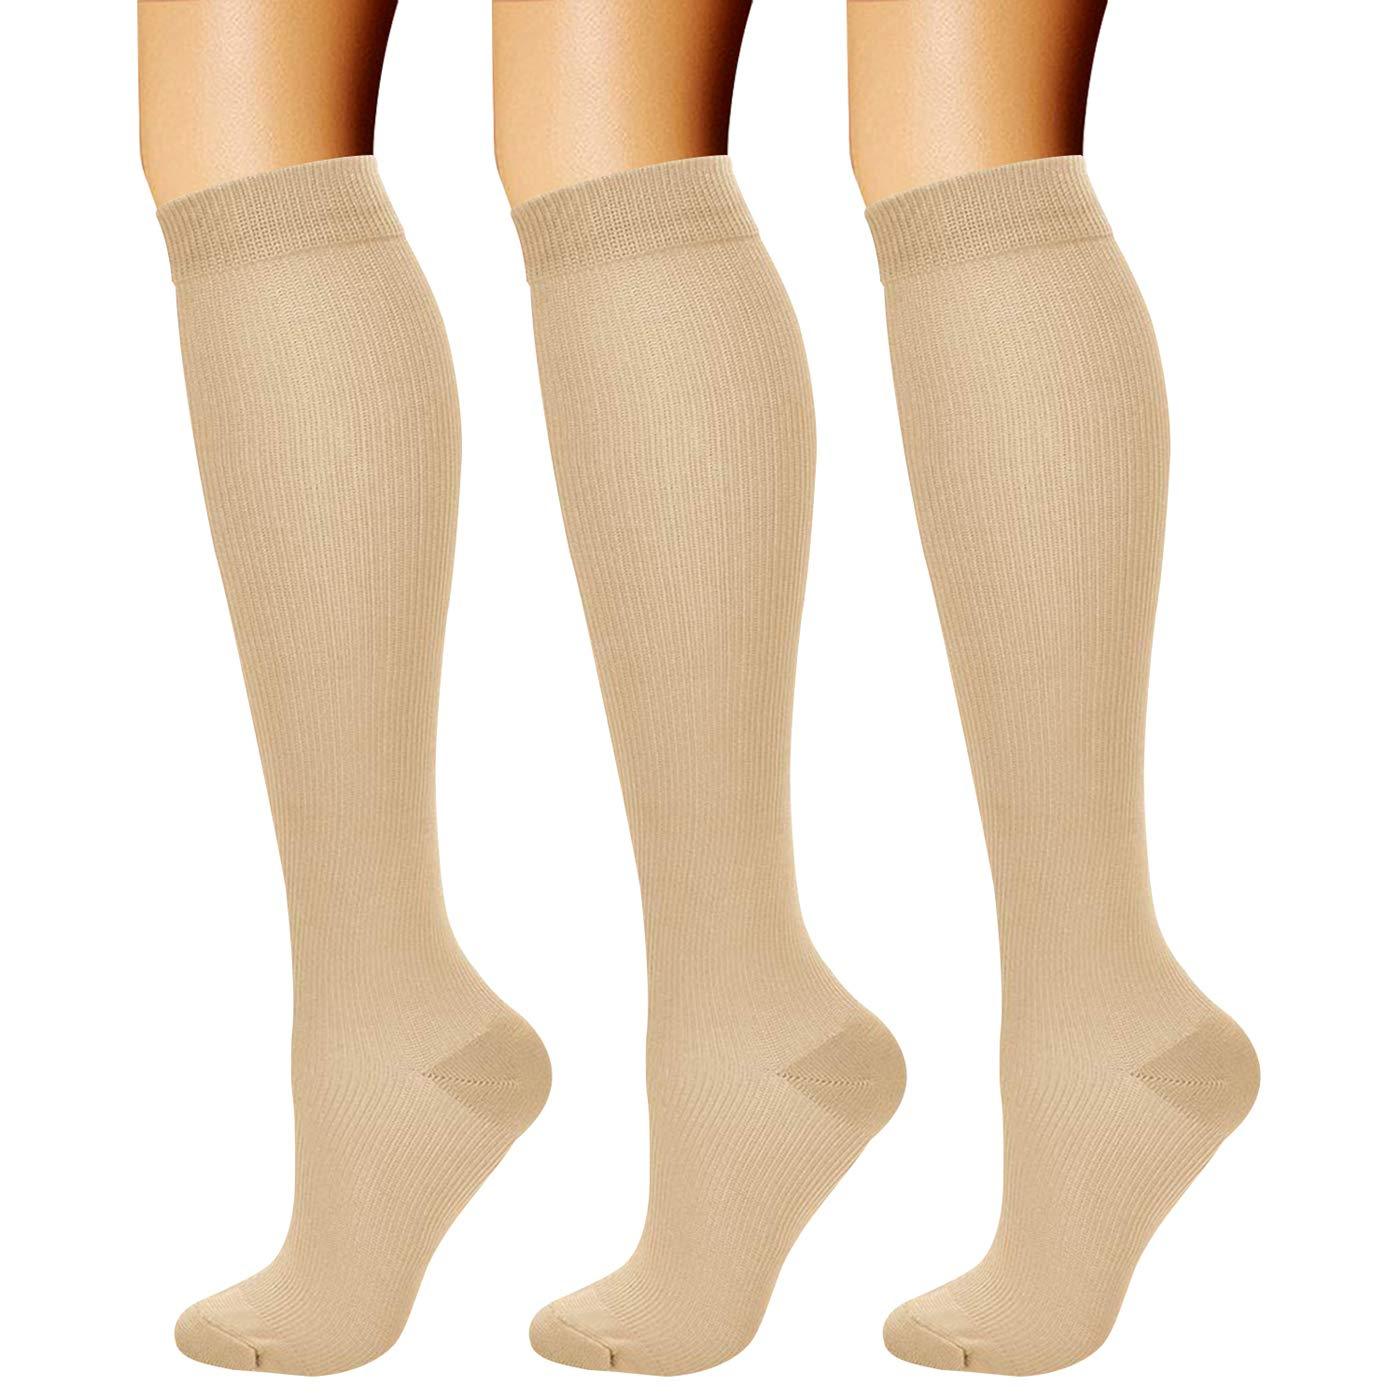 

3pairs Compression Socks For Women Men, Circulation Support For Running Nursing Athletic